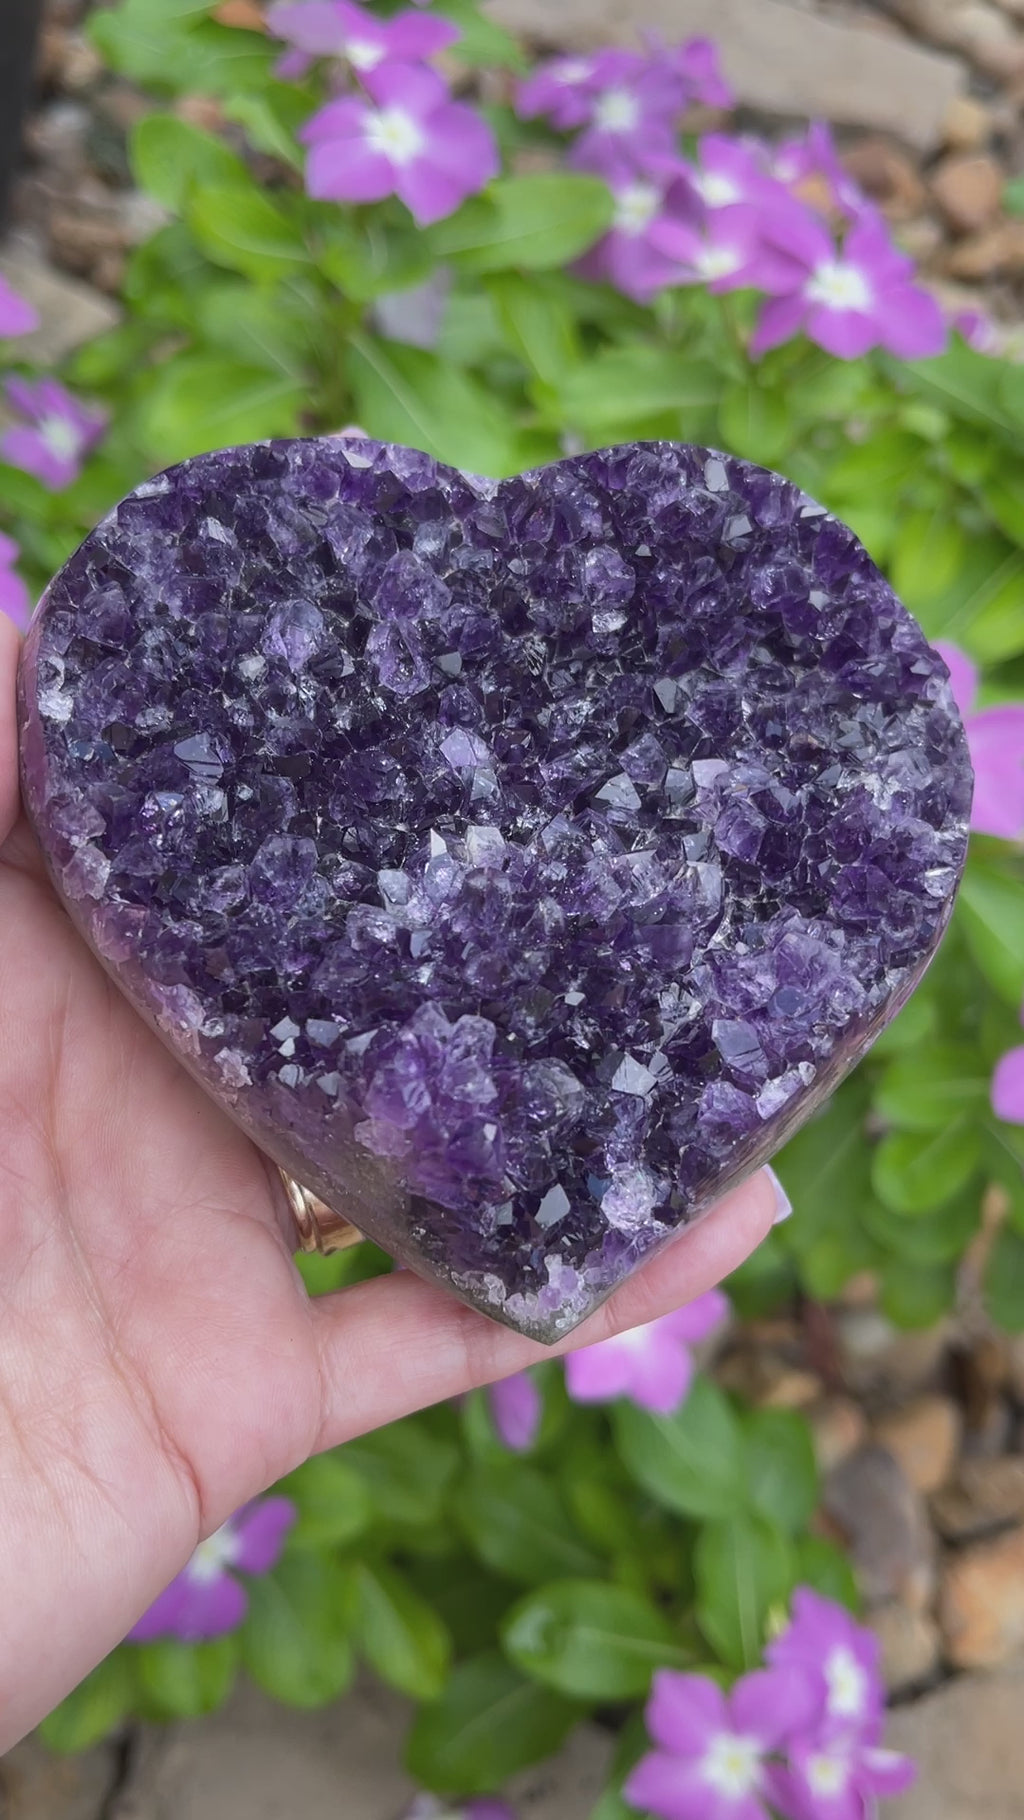 A high grade variety of amethyst crystals present in this heart shaped piece from the Santino Quarry, Artigas, Uruguay.